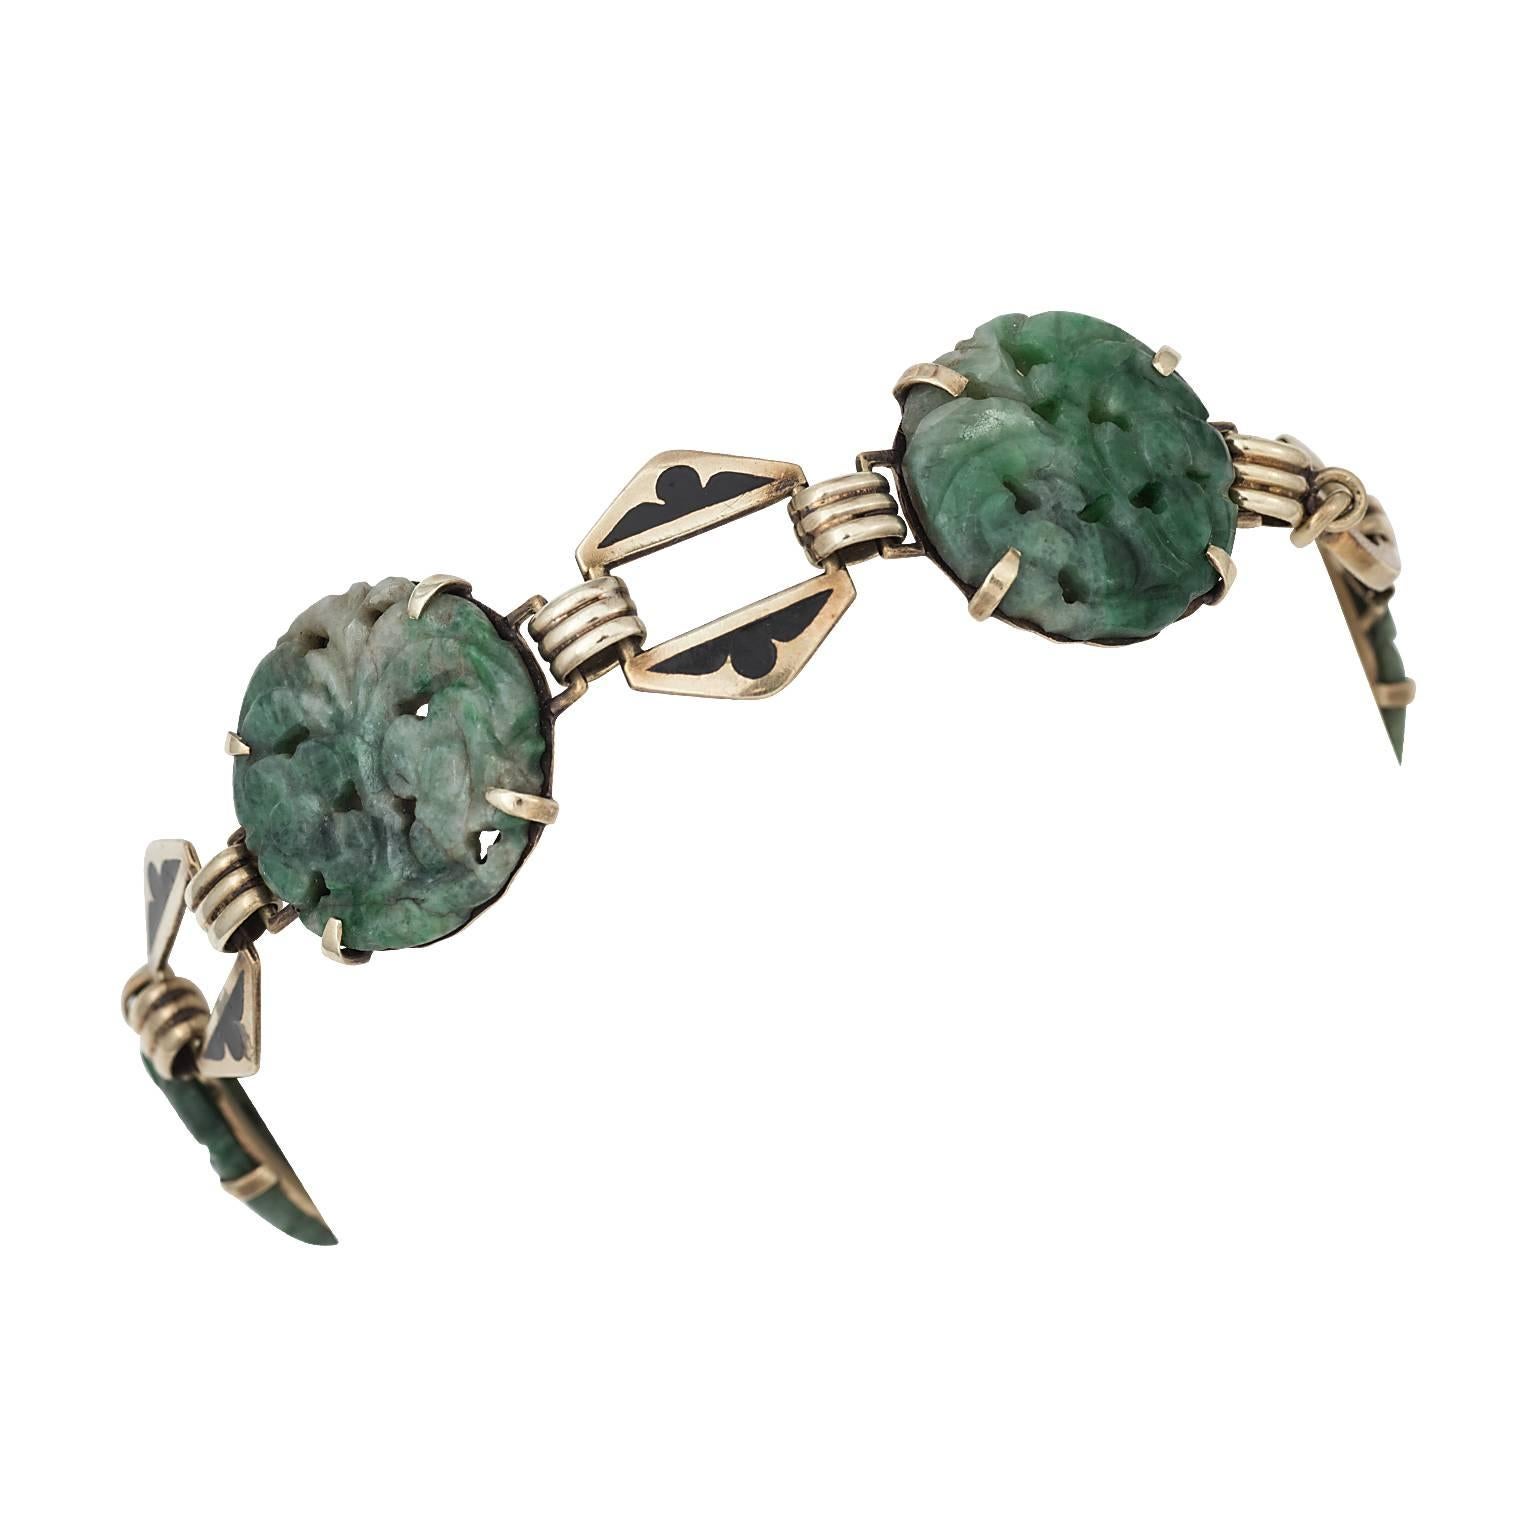 Carved jade and black enamel  14 karat yellow gold bracelet.  The jade is made into five stations, with each depicting a floral carving, linked together with black enameled gold.

Hallmark:  14K
Signature:  WL
Length:  7.00 inches 